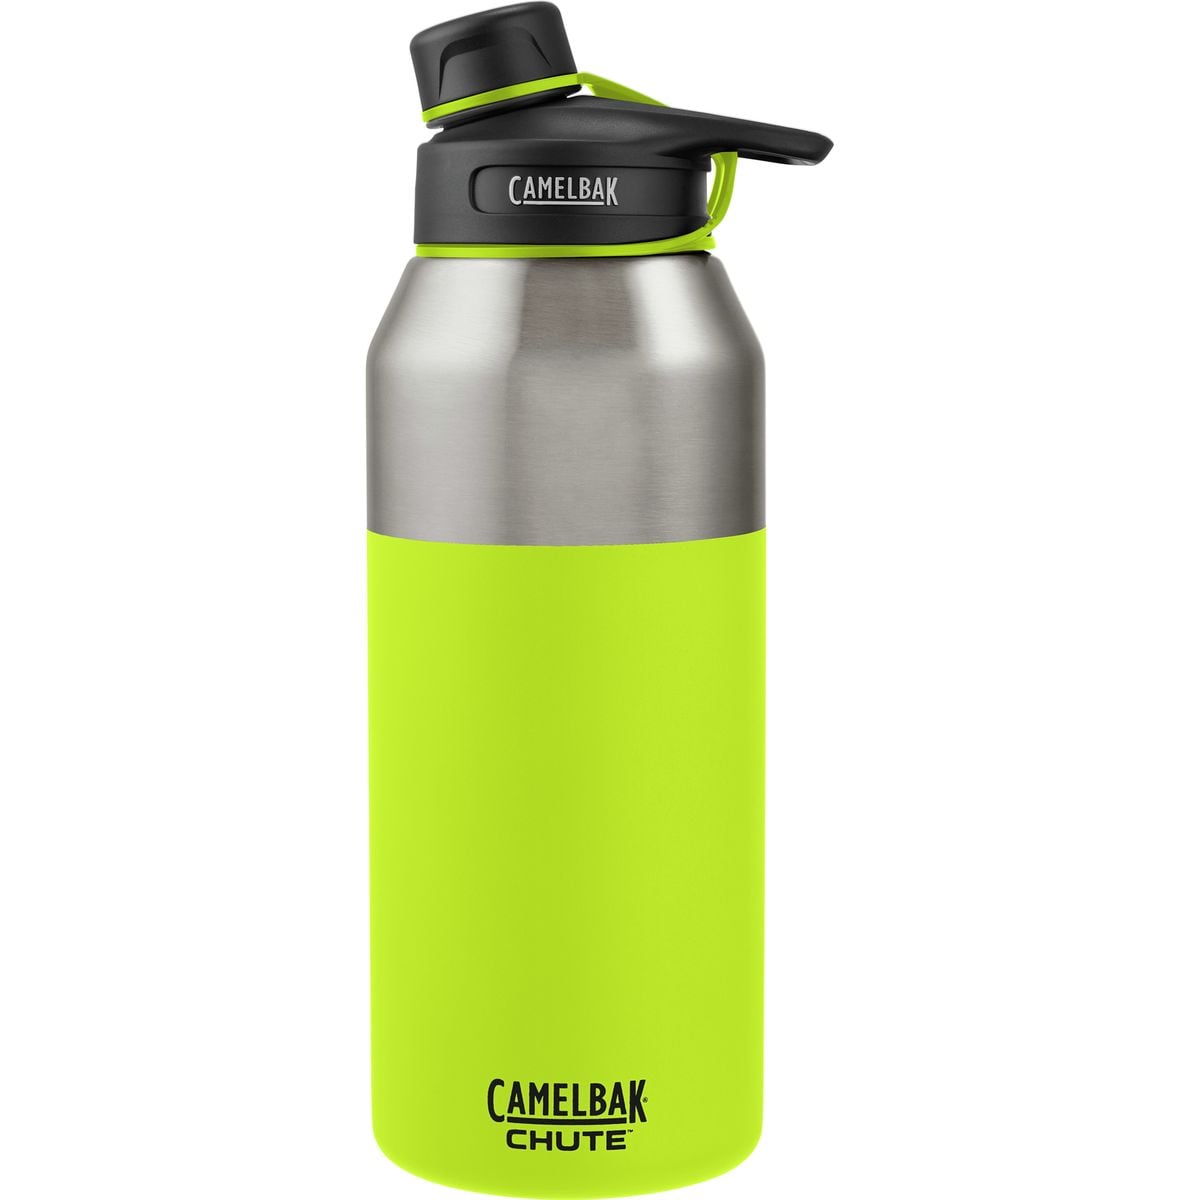 CamelBak Chute Stainless Vacuum Insulated 12L Water Bottle